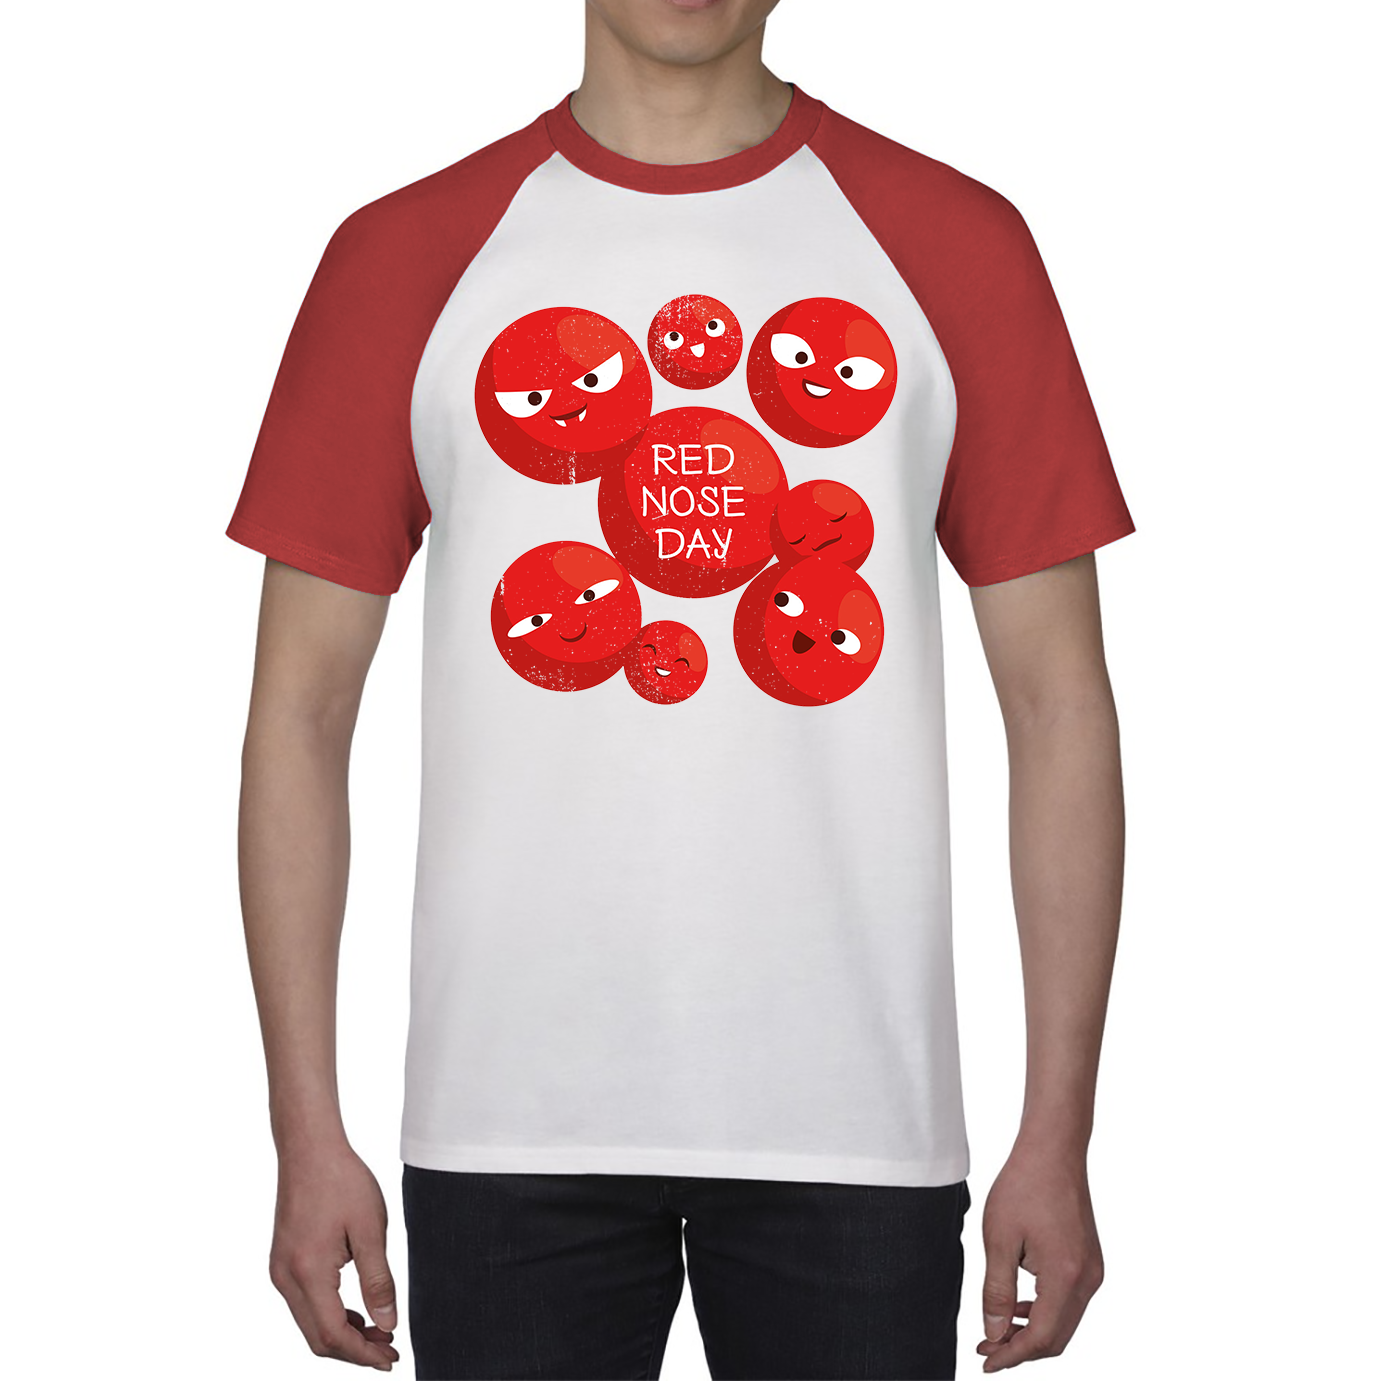 Red Nose Day Funny Noses Baseball T Shirt. 50% Goes To Charity